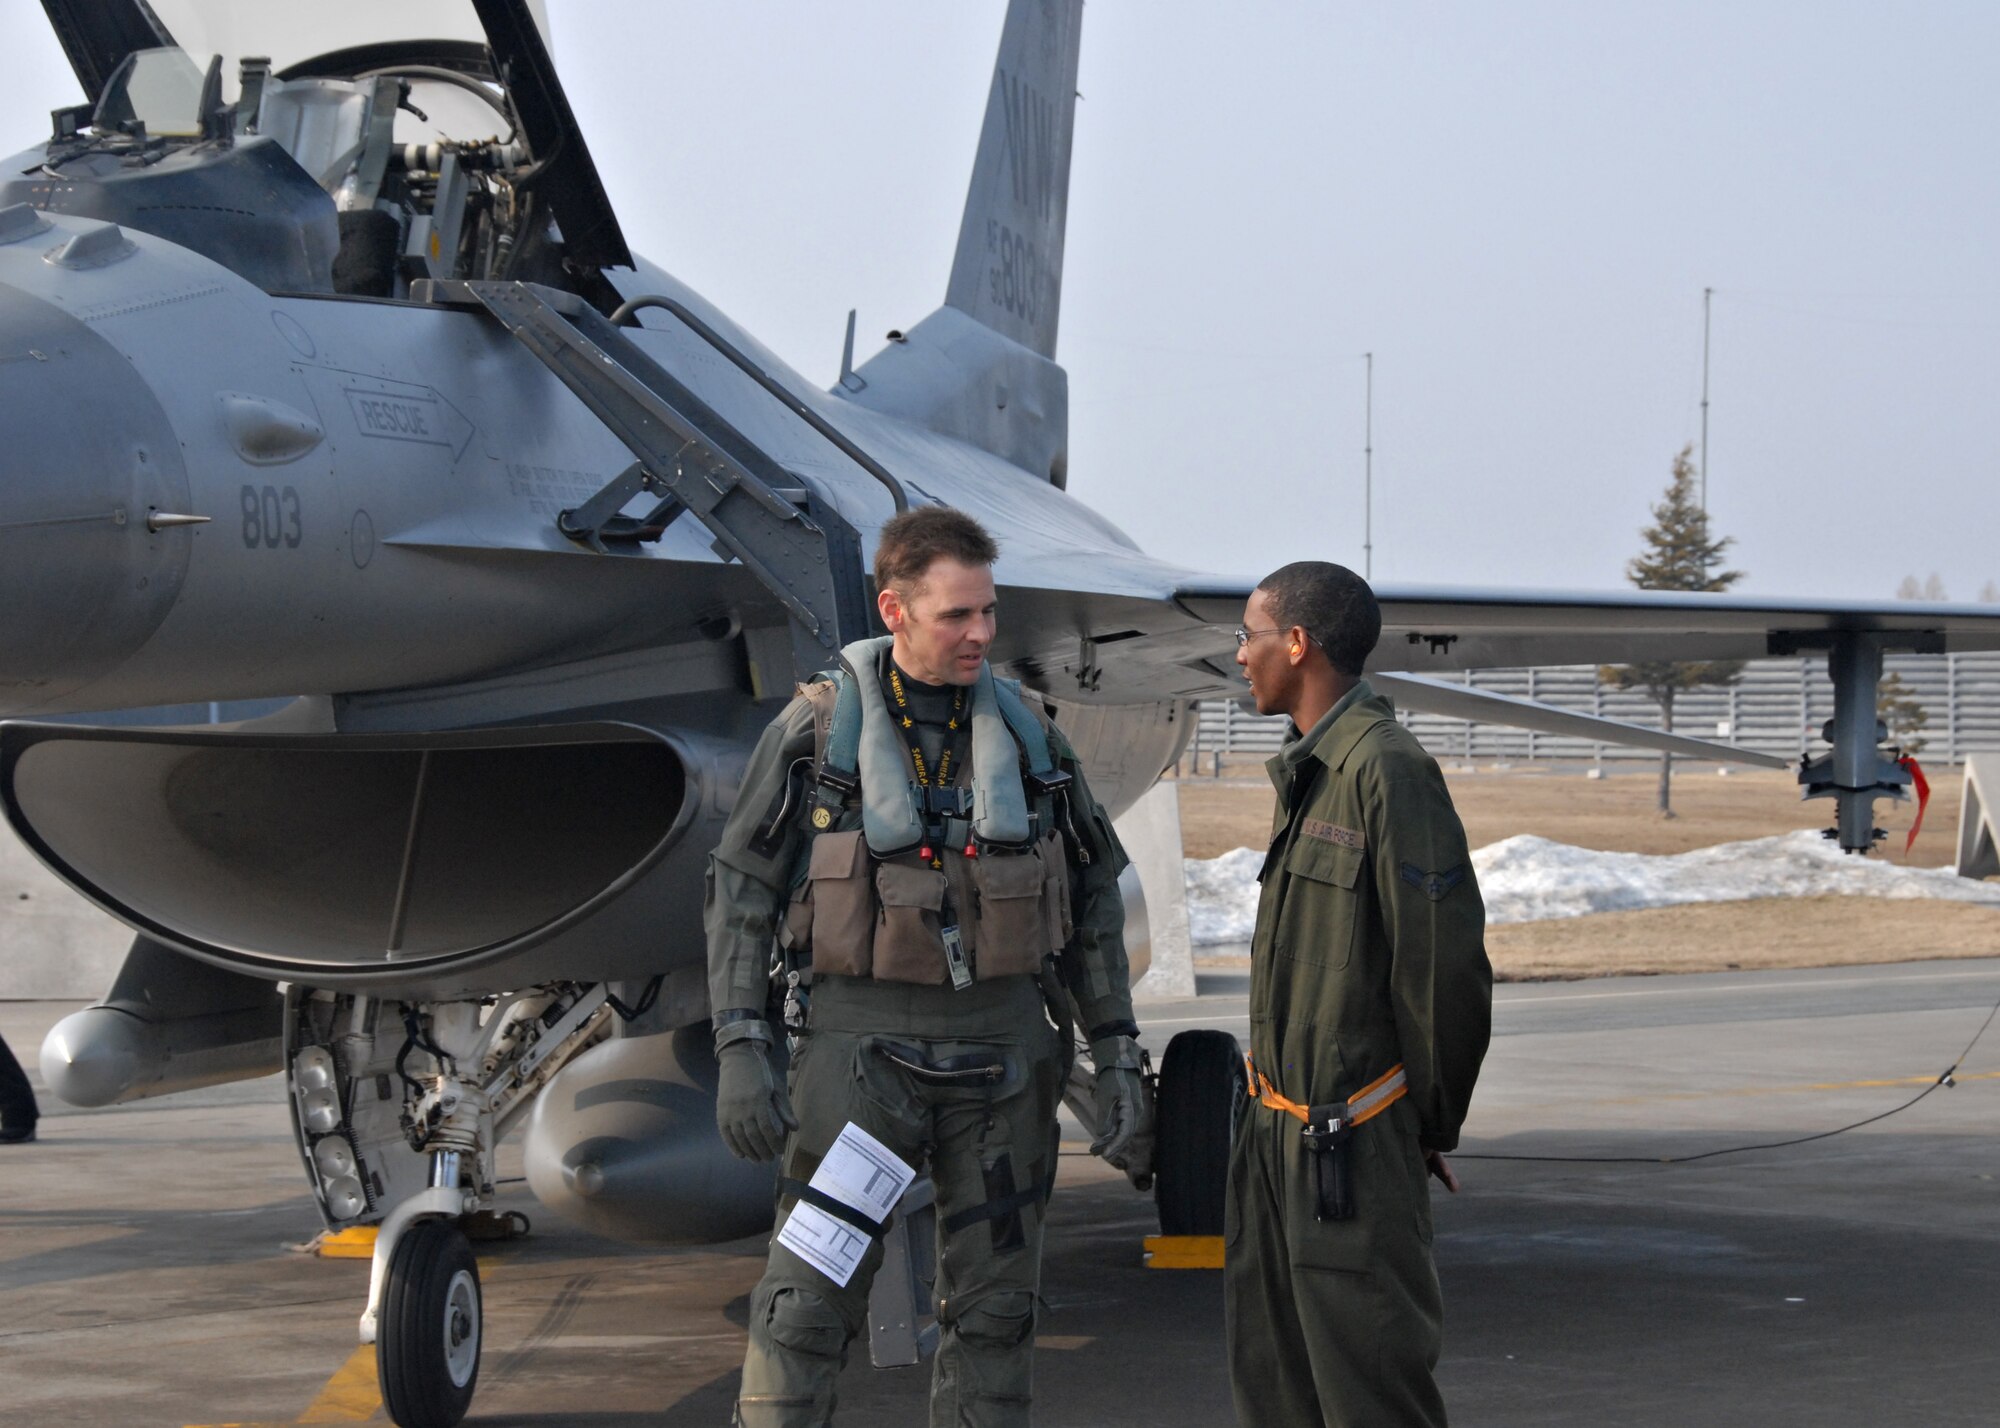 MISAWA AIR BASE, Japan -- Lt. Col. Charles Toplikar, 14th Fighter Squadron commander, talks with Airman 1st Class Alvin Felder, 35th Aircraft Maintenance Squadron crew chief, during a pre-flight inspection March 11, 2008. Colonel Toplikar and other 14th Fighter Squadron members participated in Seikan War, a joint bilateral air exercise, with the Japan Air Self Defense Force from March 10-13, 2008. (U.S. Air Force photo by Staff Sgt. Rachel Martinez)